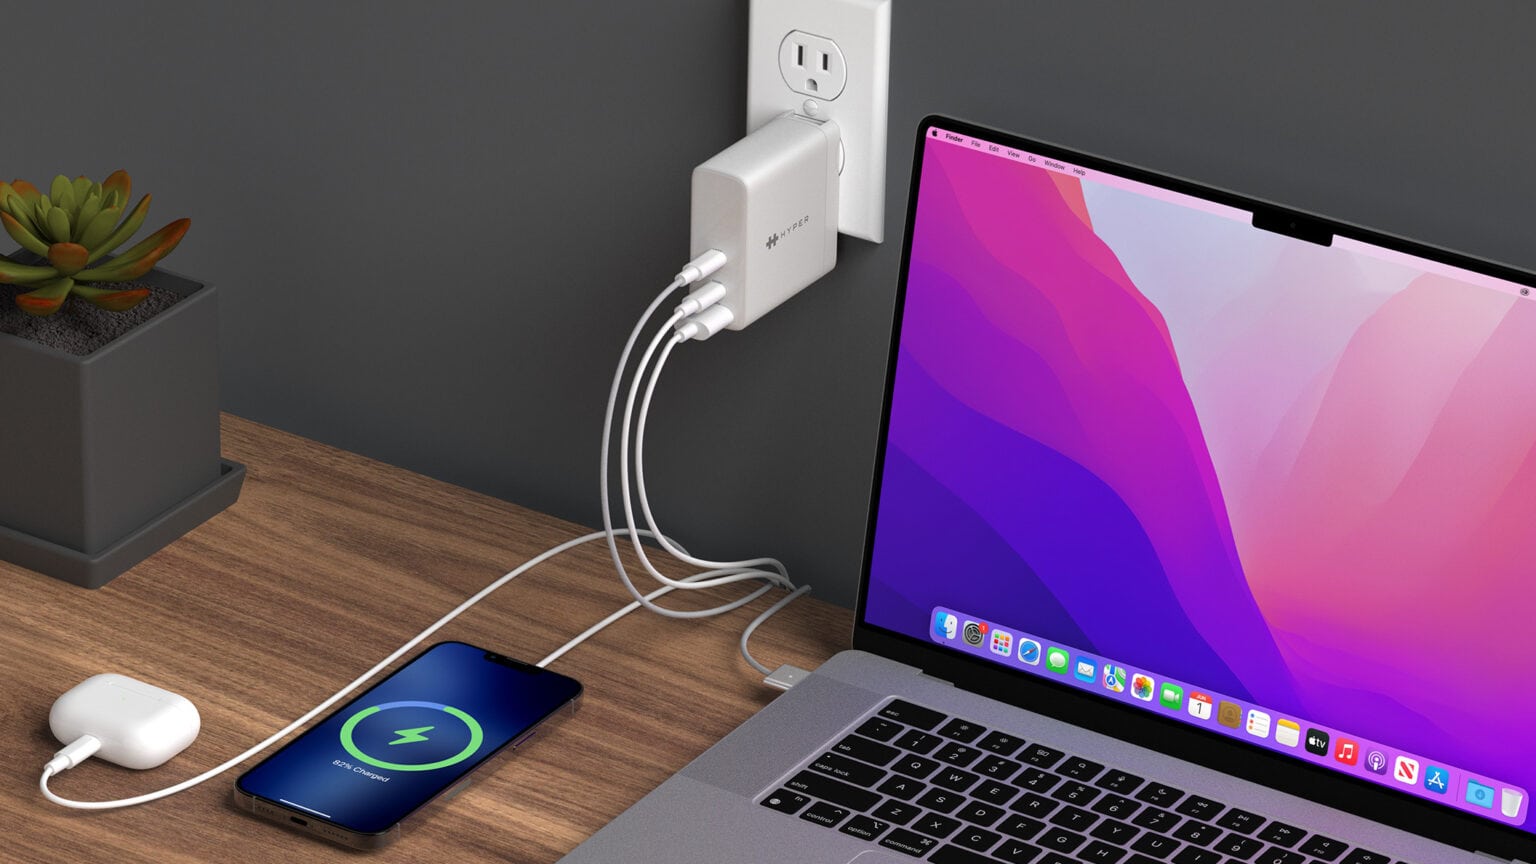 HyperJuice wall charger pumps a whopping 140 watts into MacBook Pro